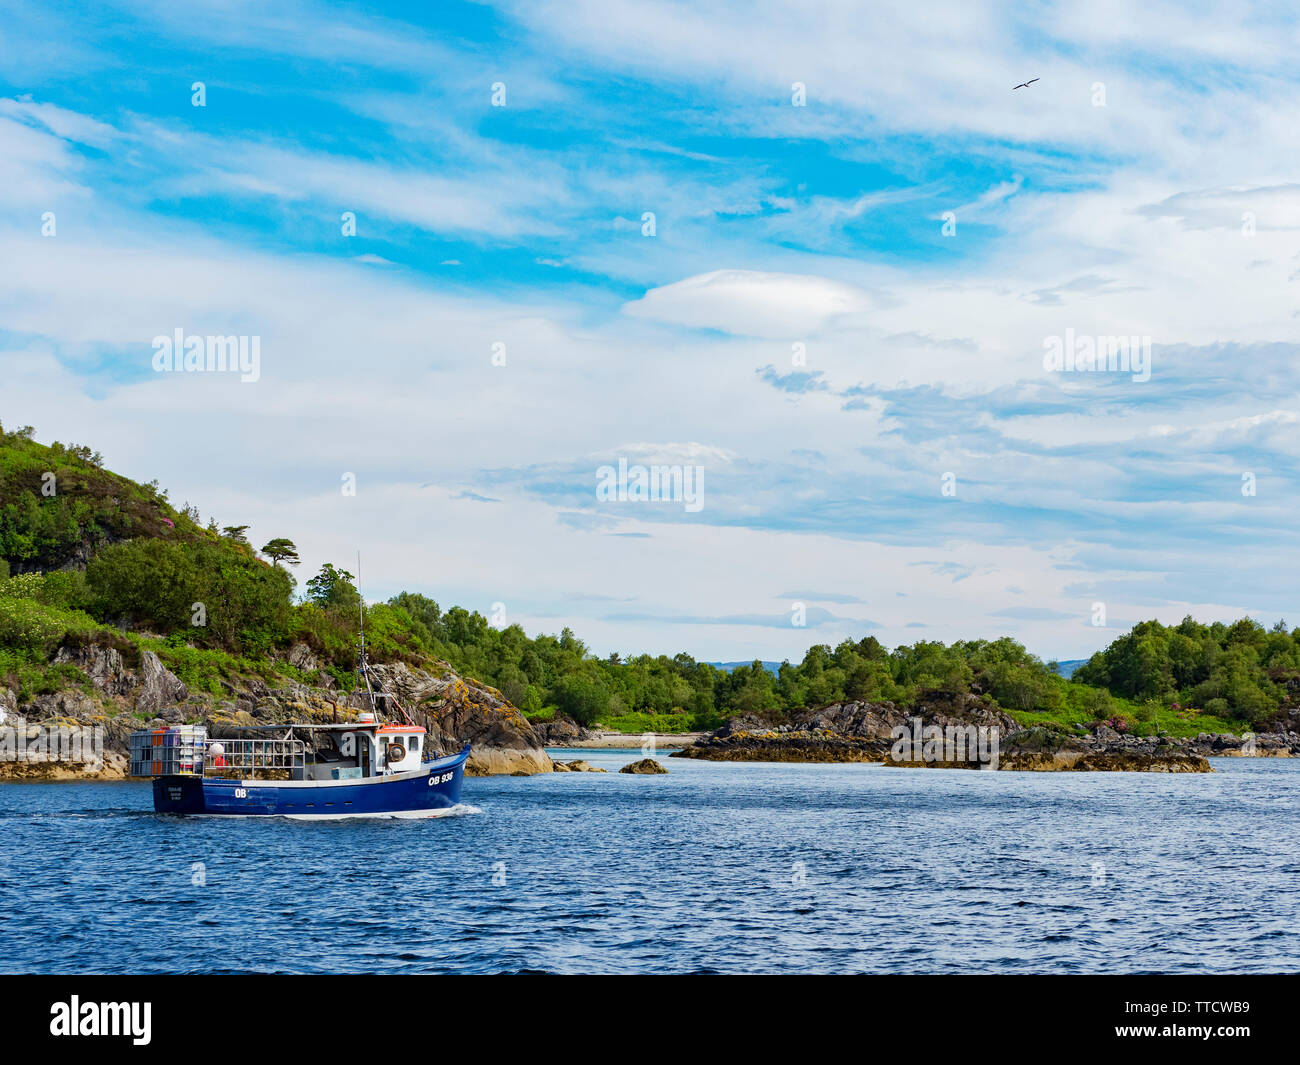 Fishing Boat Heading Out To Sea, Scotland Stock Photo